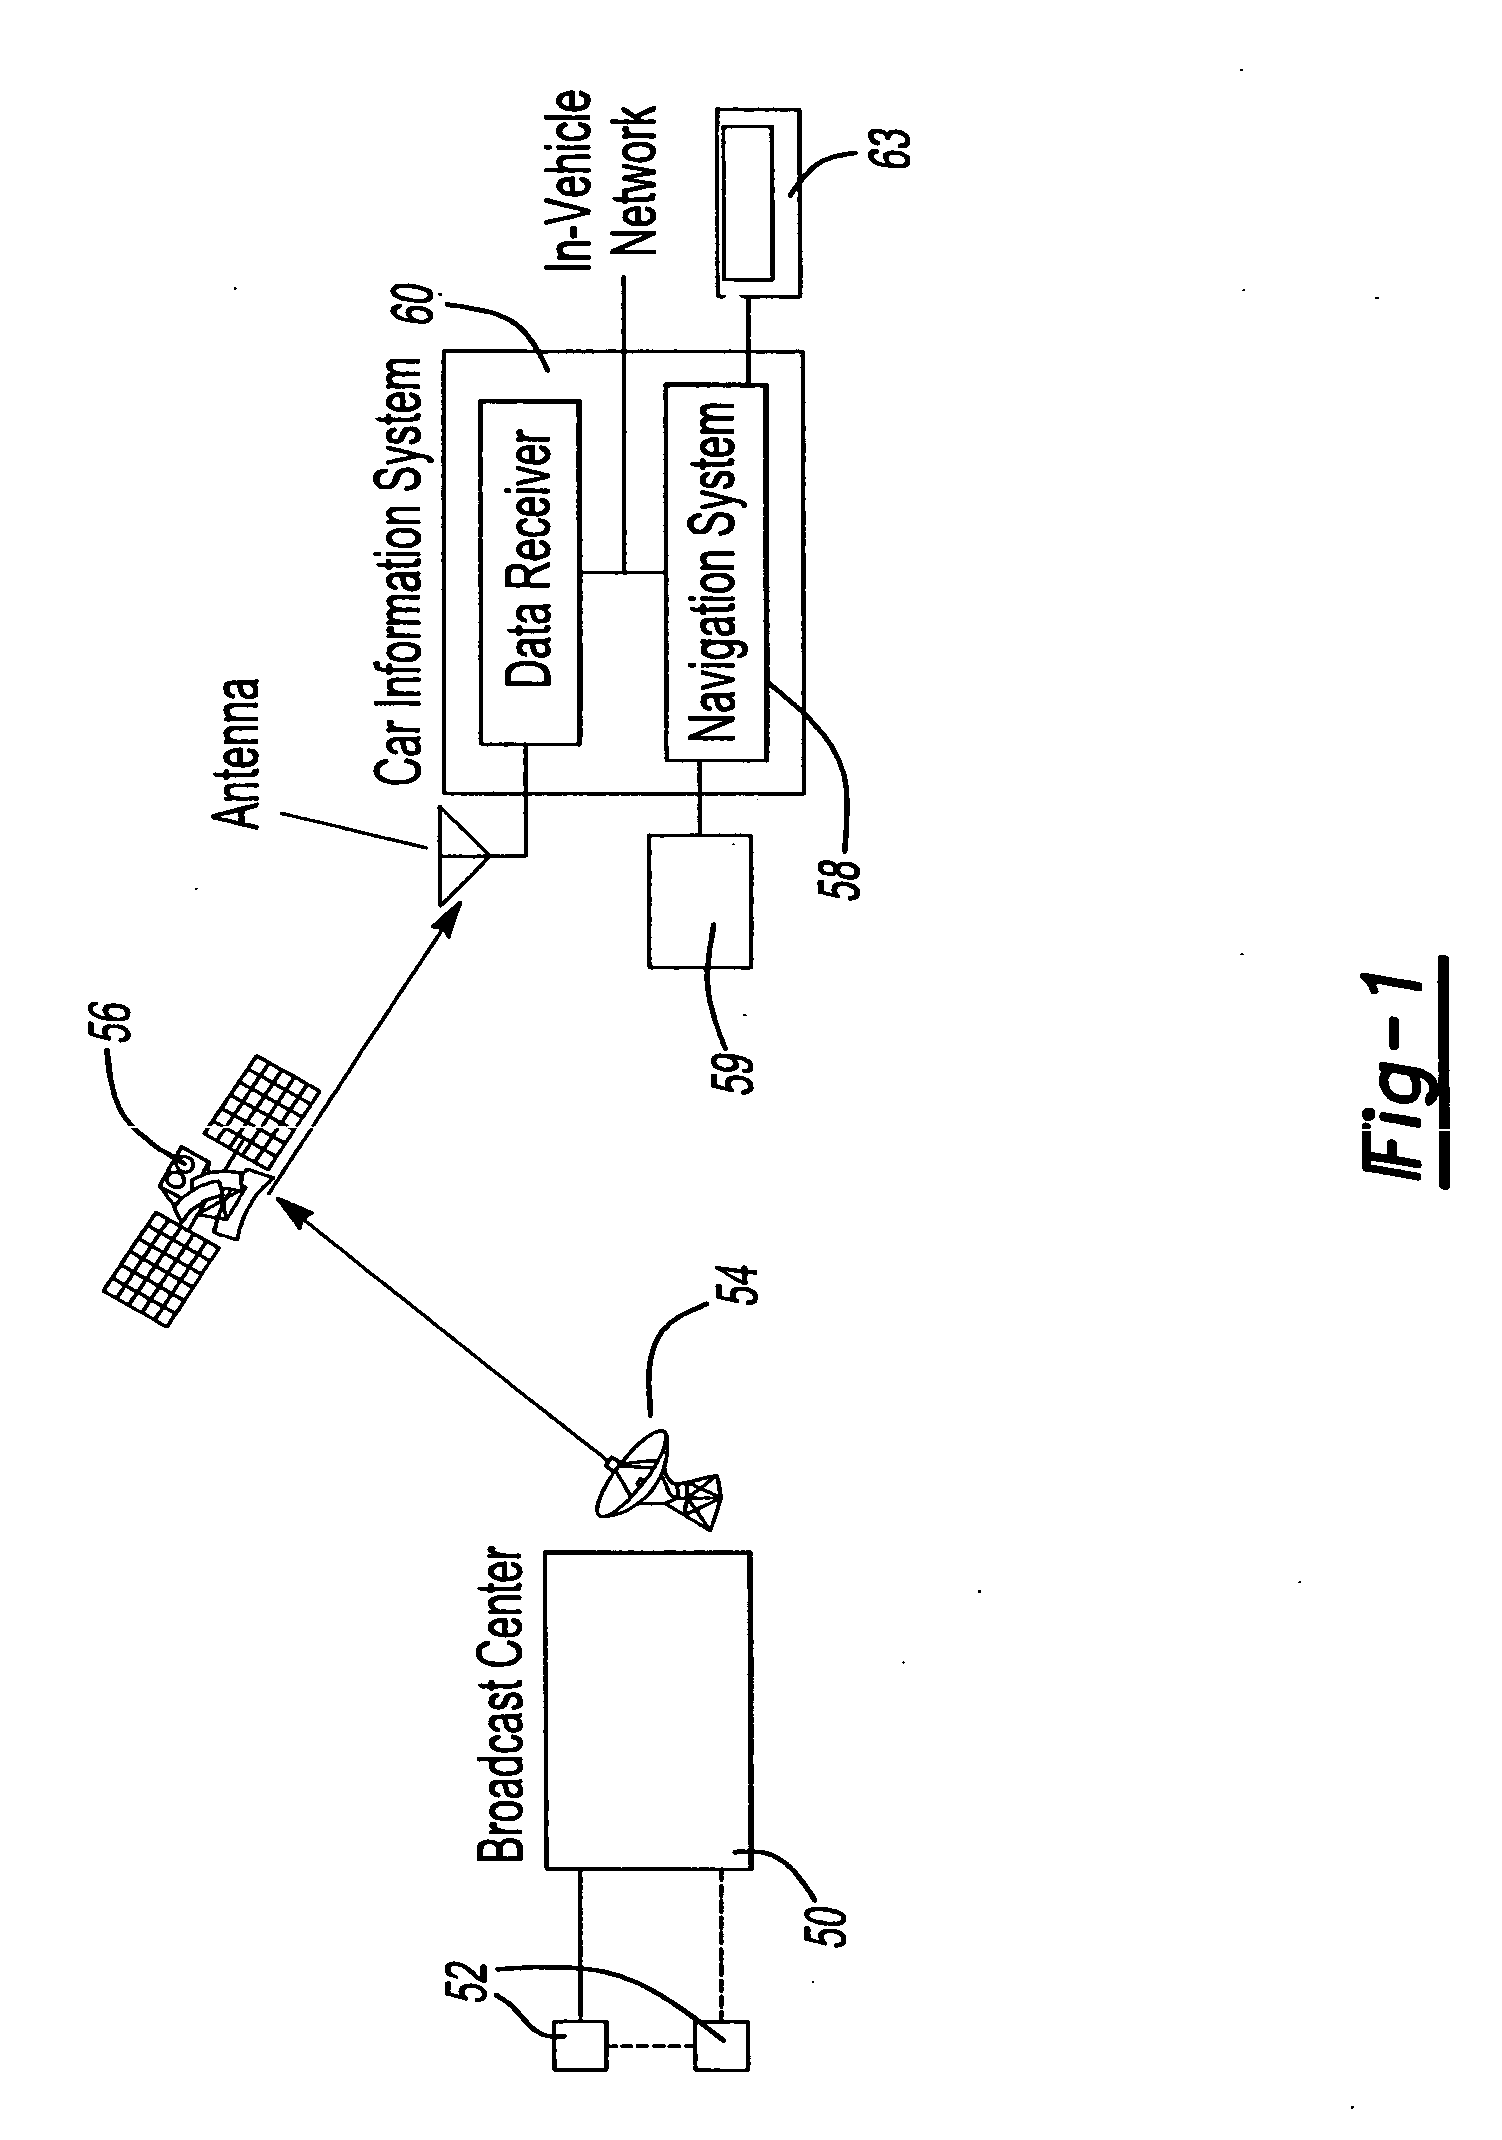 System and method for processing and displaying traffic information in an automotive navigation system